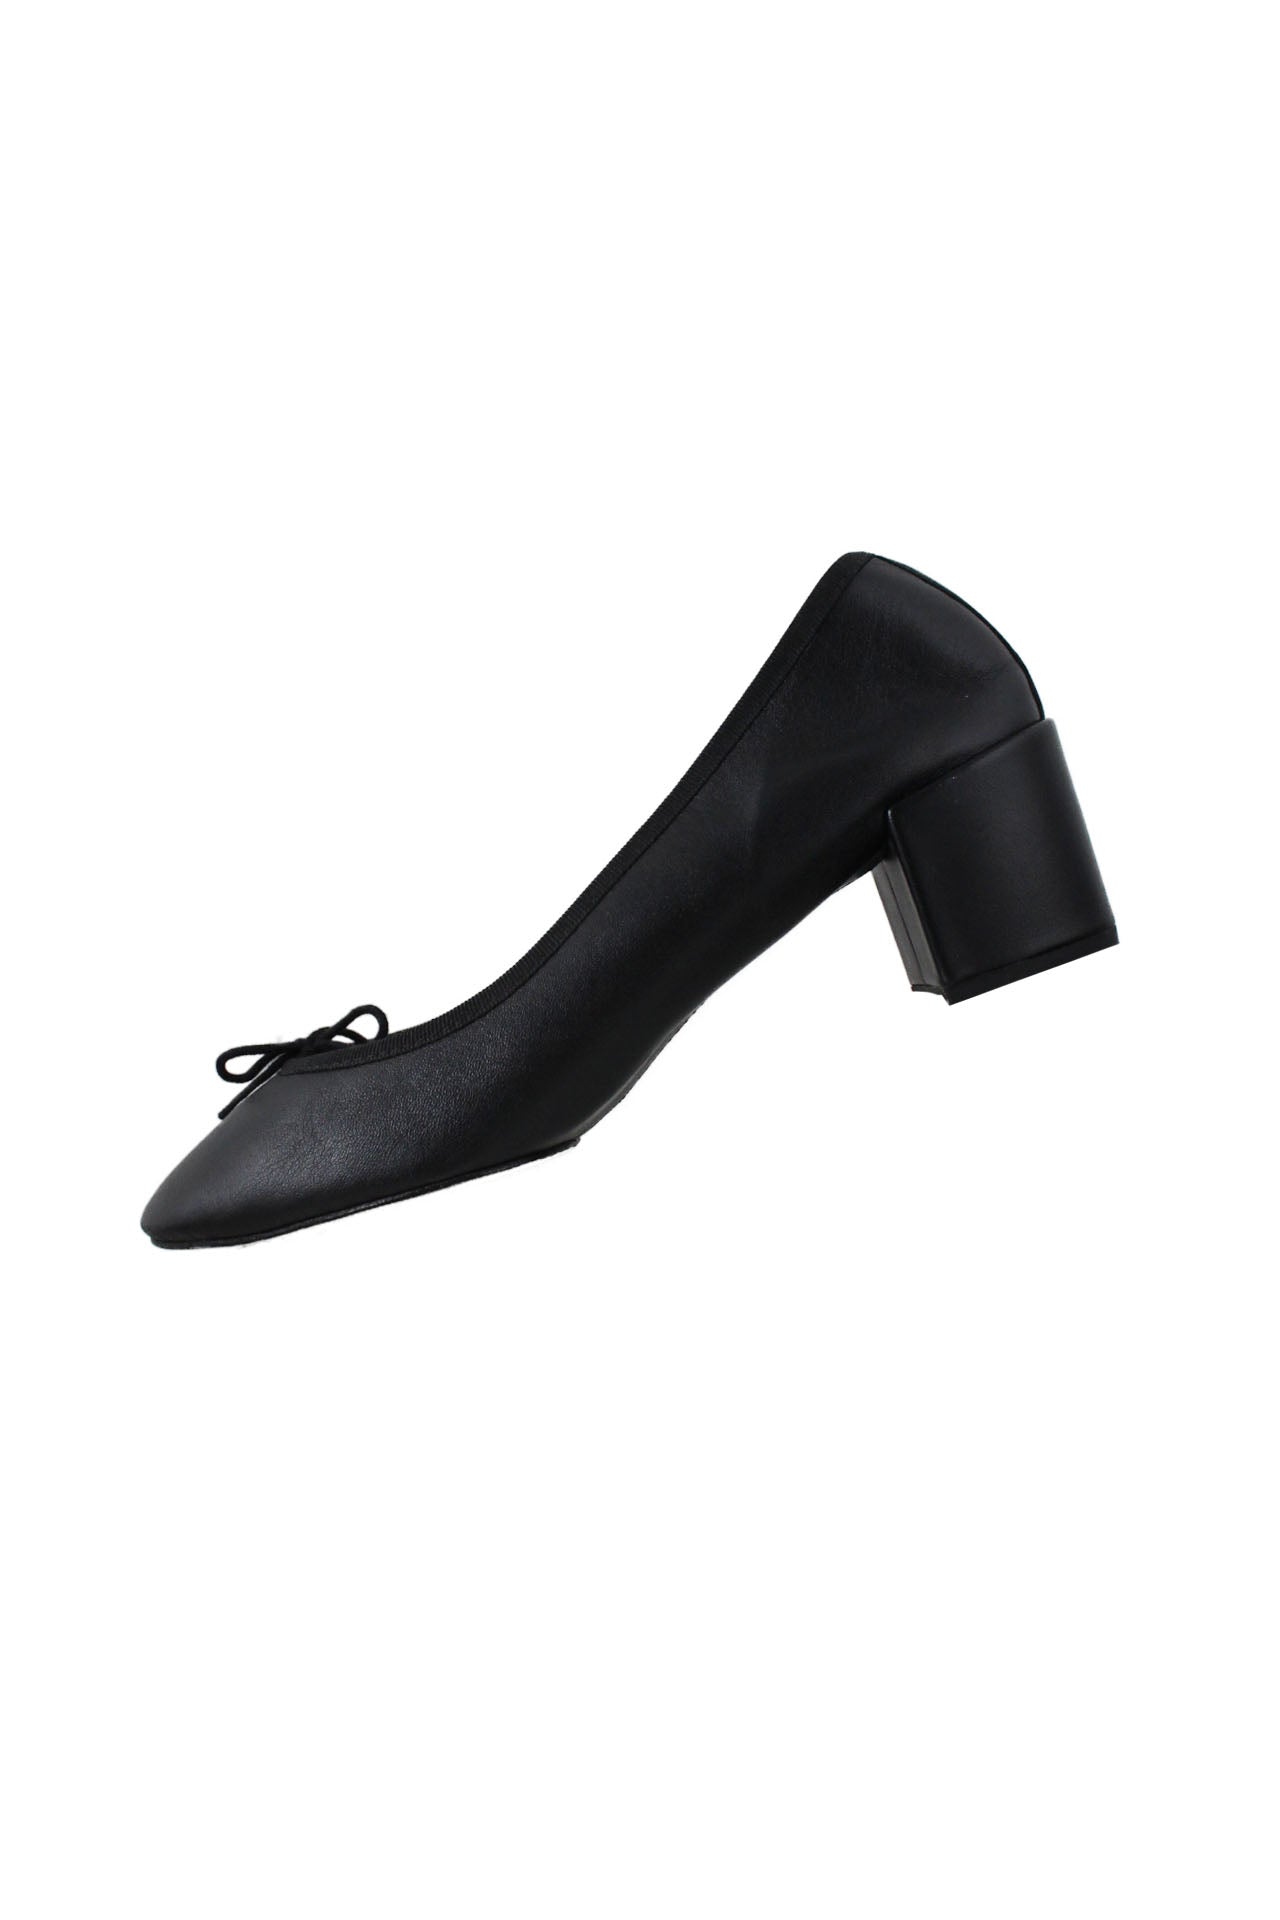 description: repetto black heeled mary janes. features rounded toe silhouette, block heel, bow at front, and slip on style. comes with shoe box. 